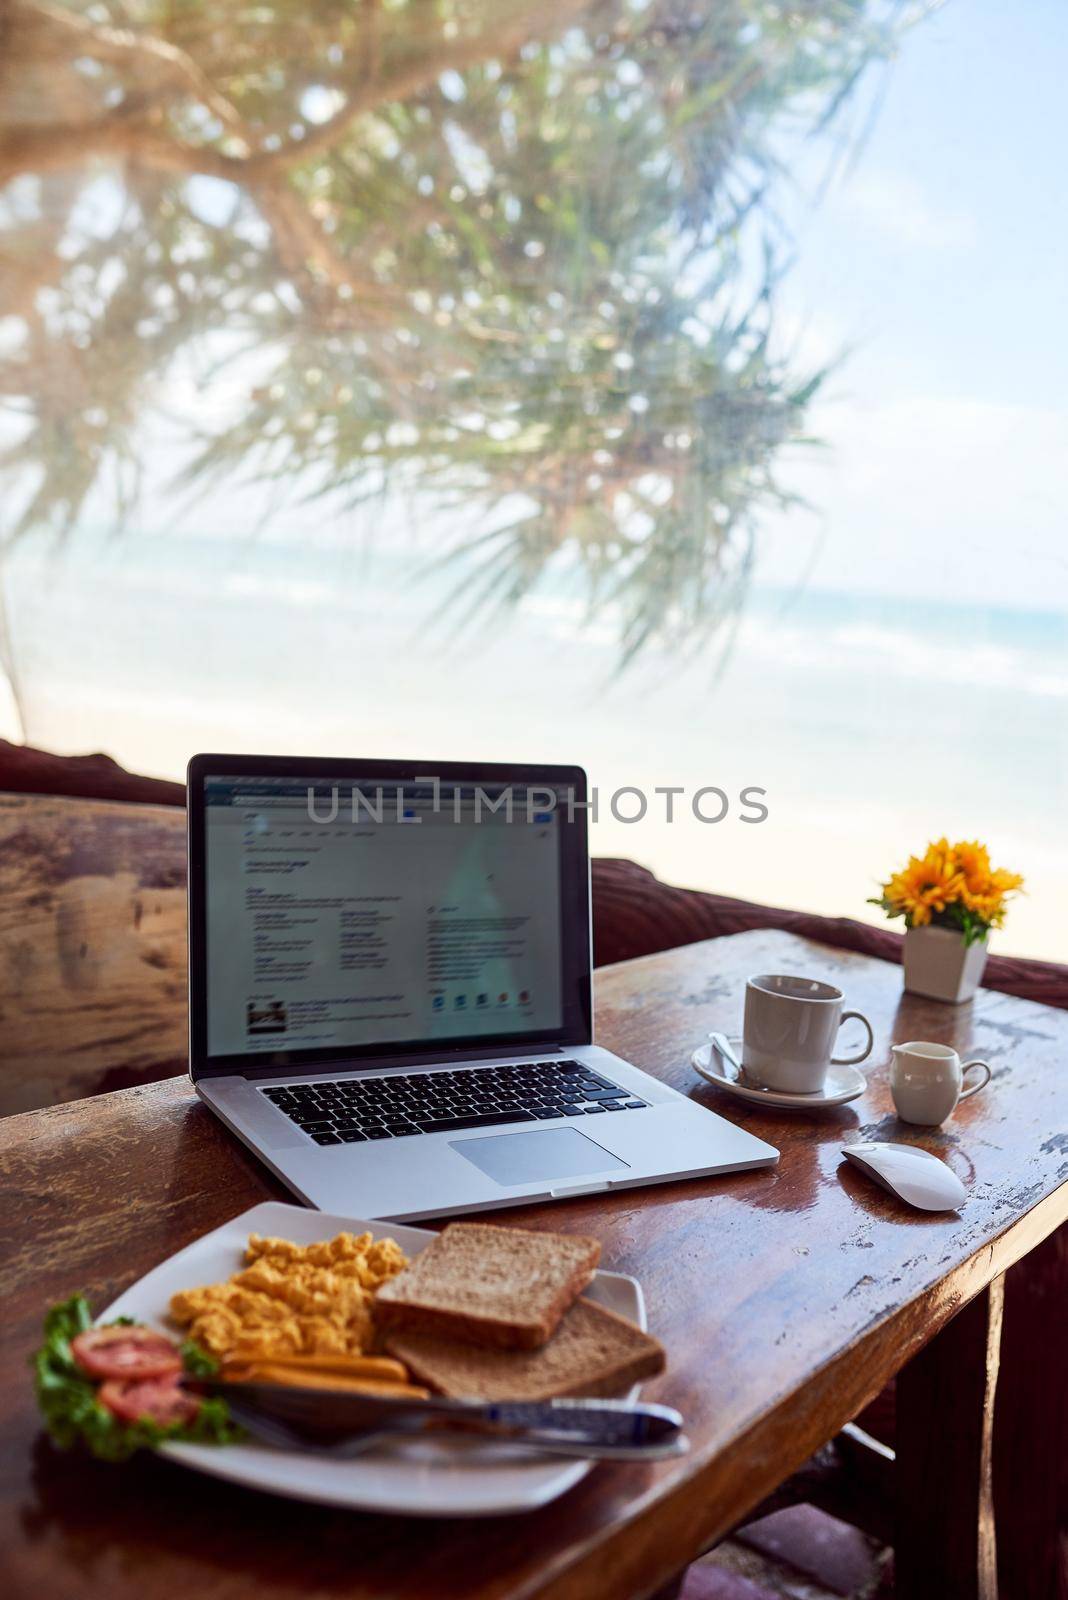 Shot of a laptop and freshly made breakfast on a table with a view of the beach in the background.